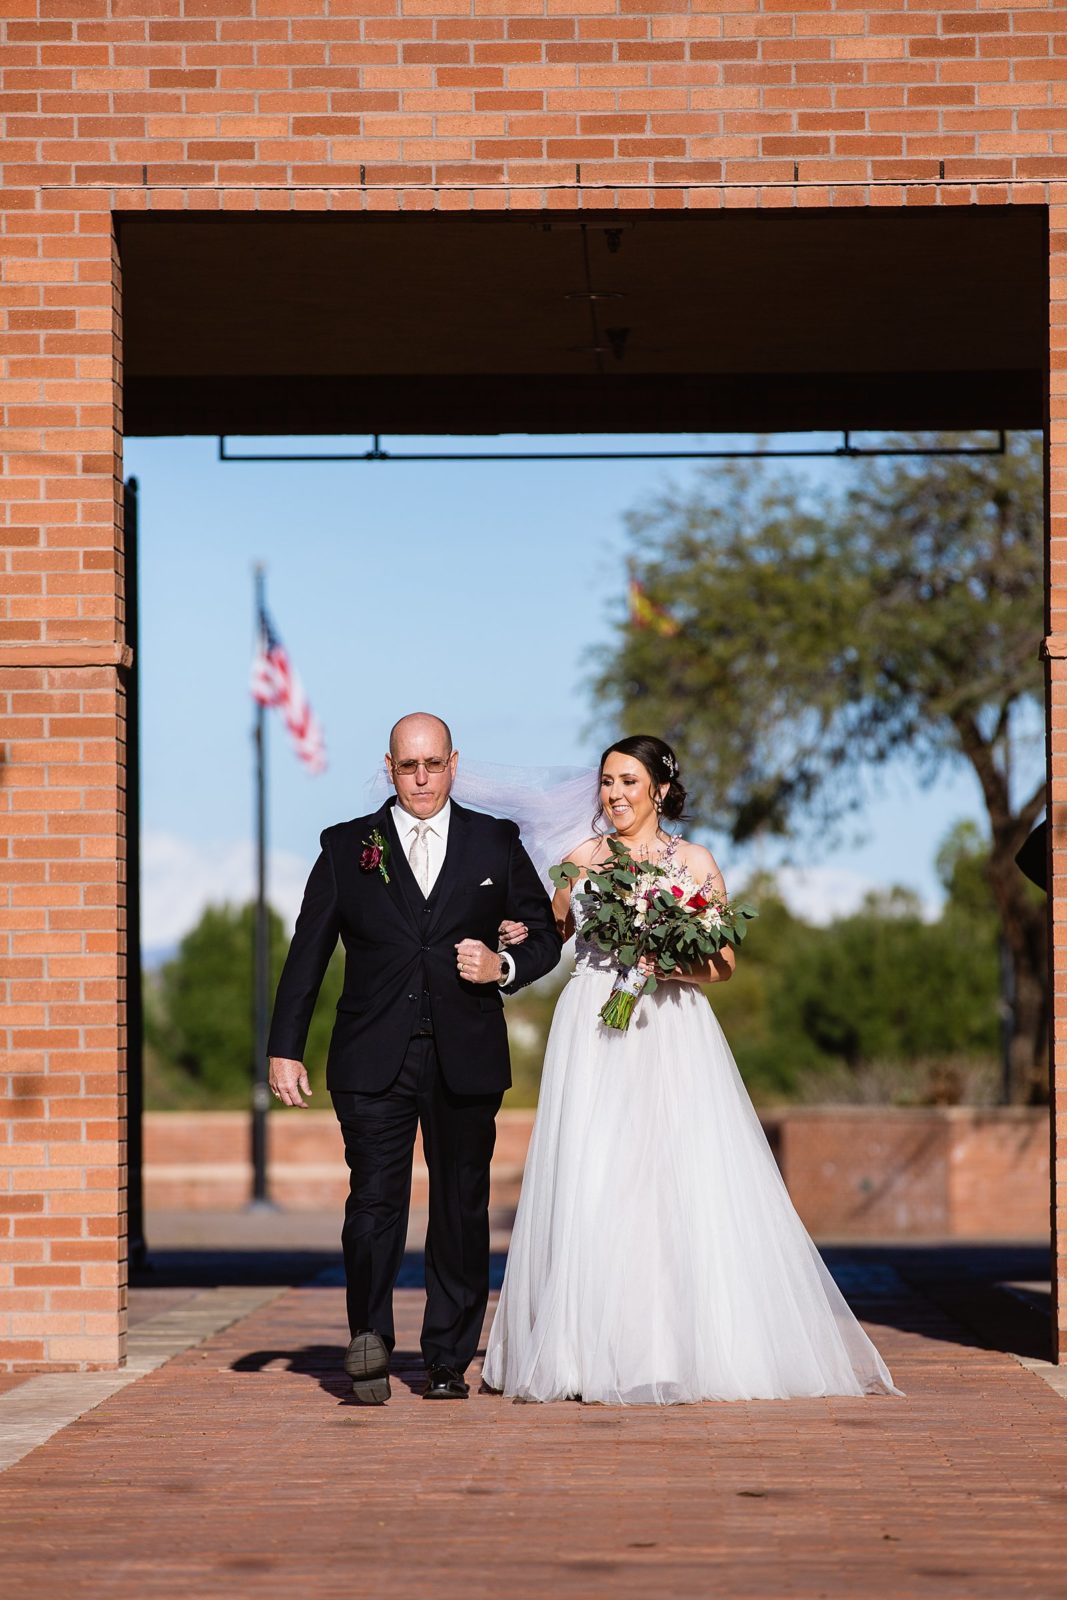 Bride walking down aisle during Arizona Heritage Center at Papago Park wedding ceremony by Arizona wedding photographer PMA Photography.